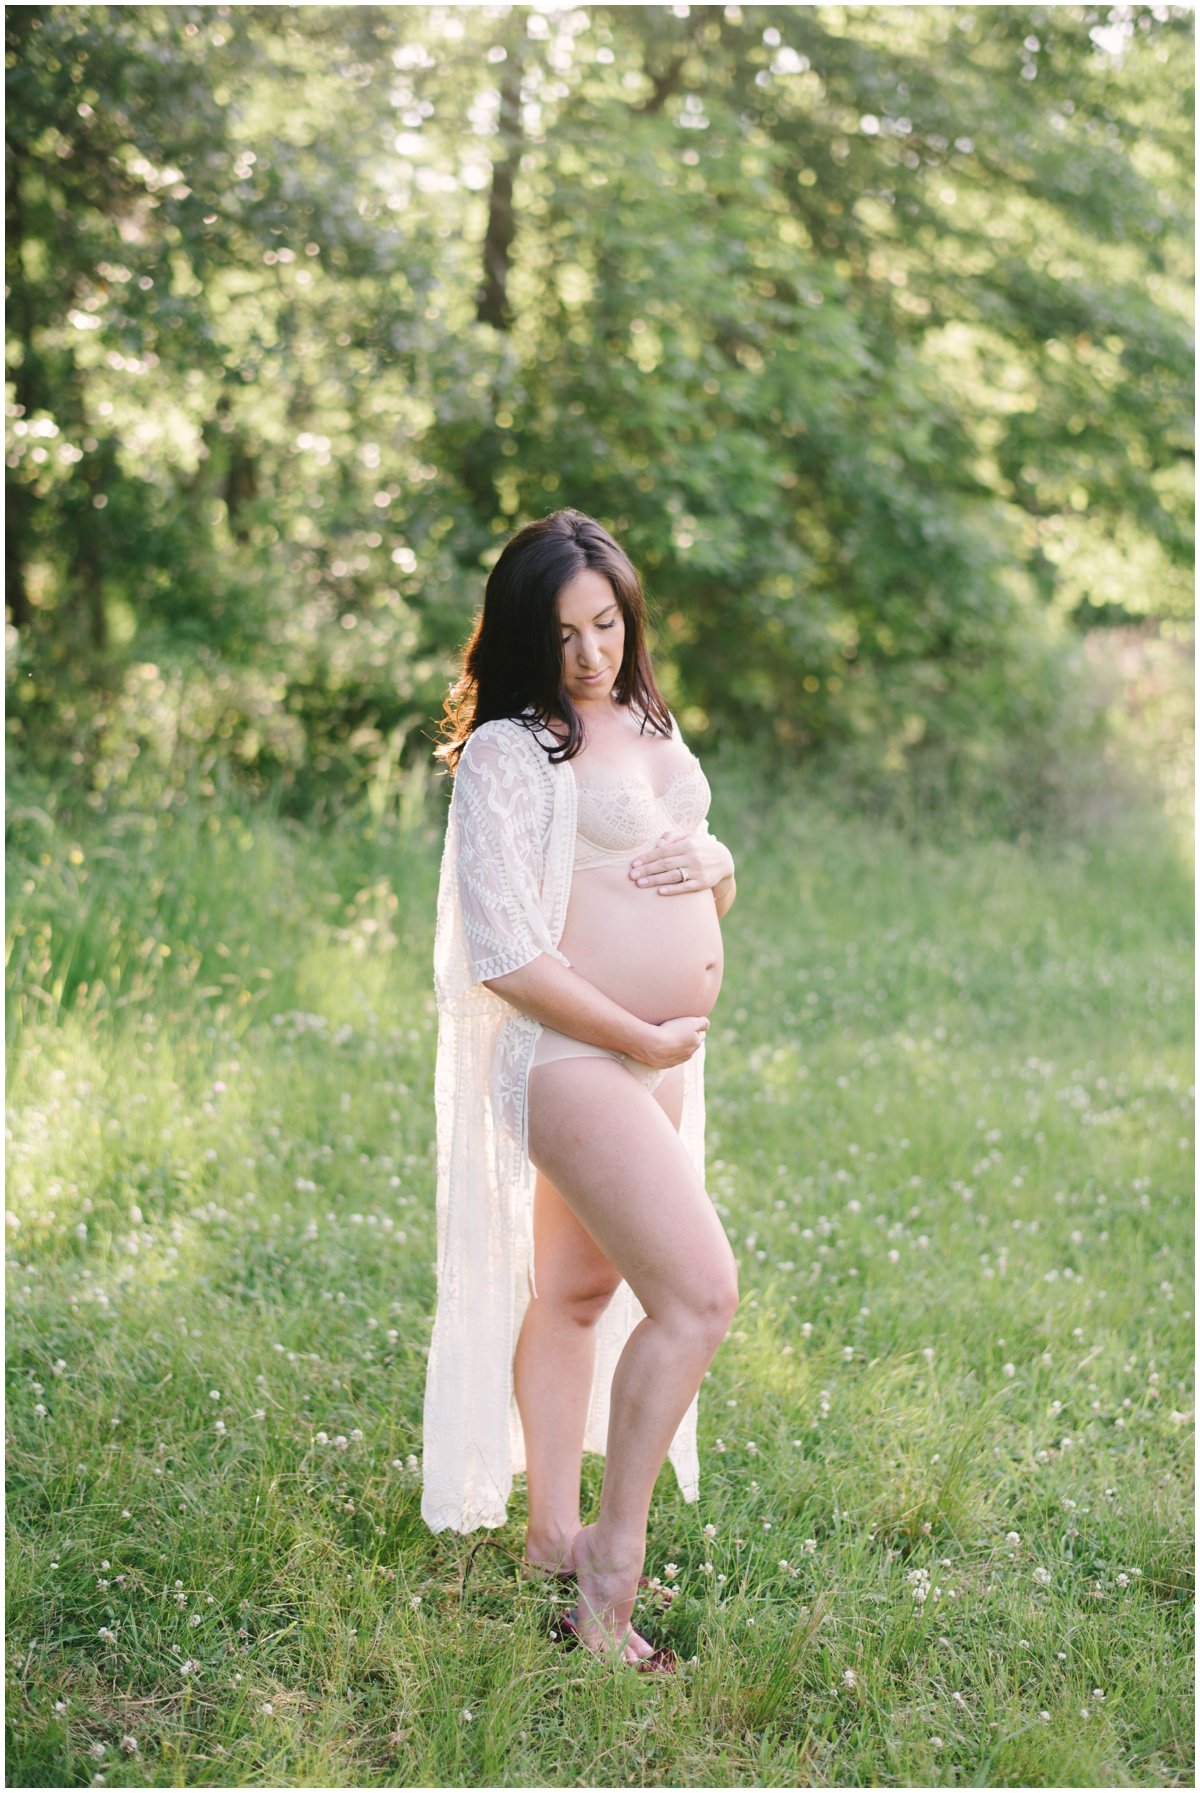 Woman standing in field looking down at pregnant belly during maternity session | NKB Photo